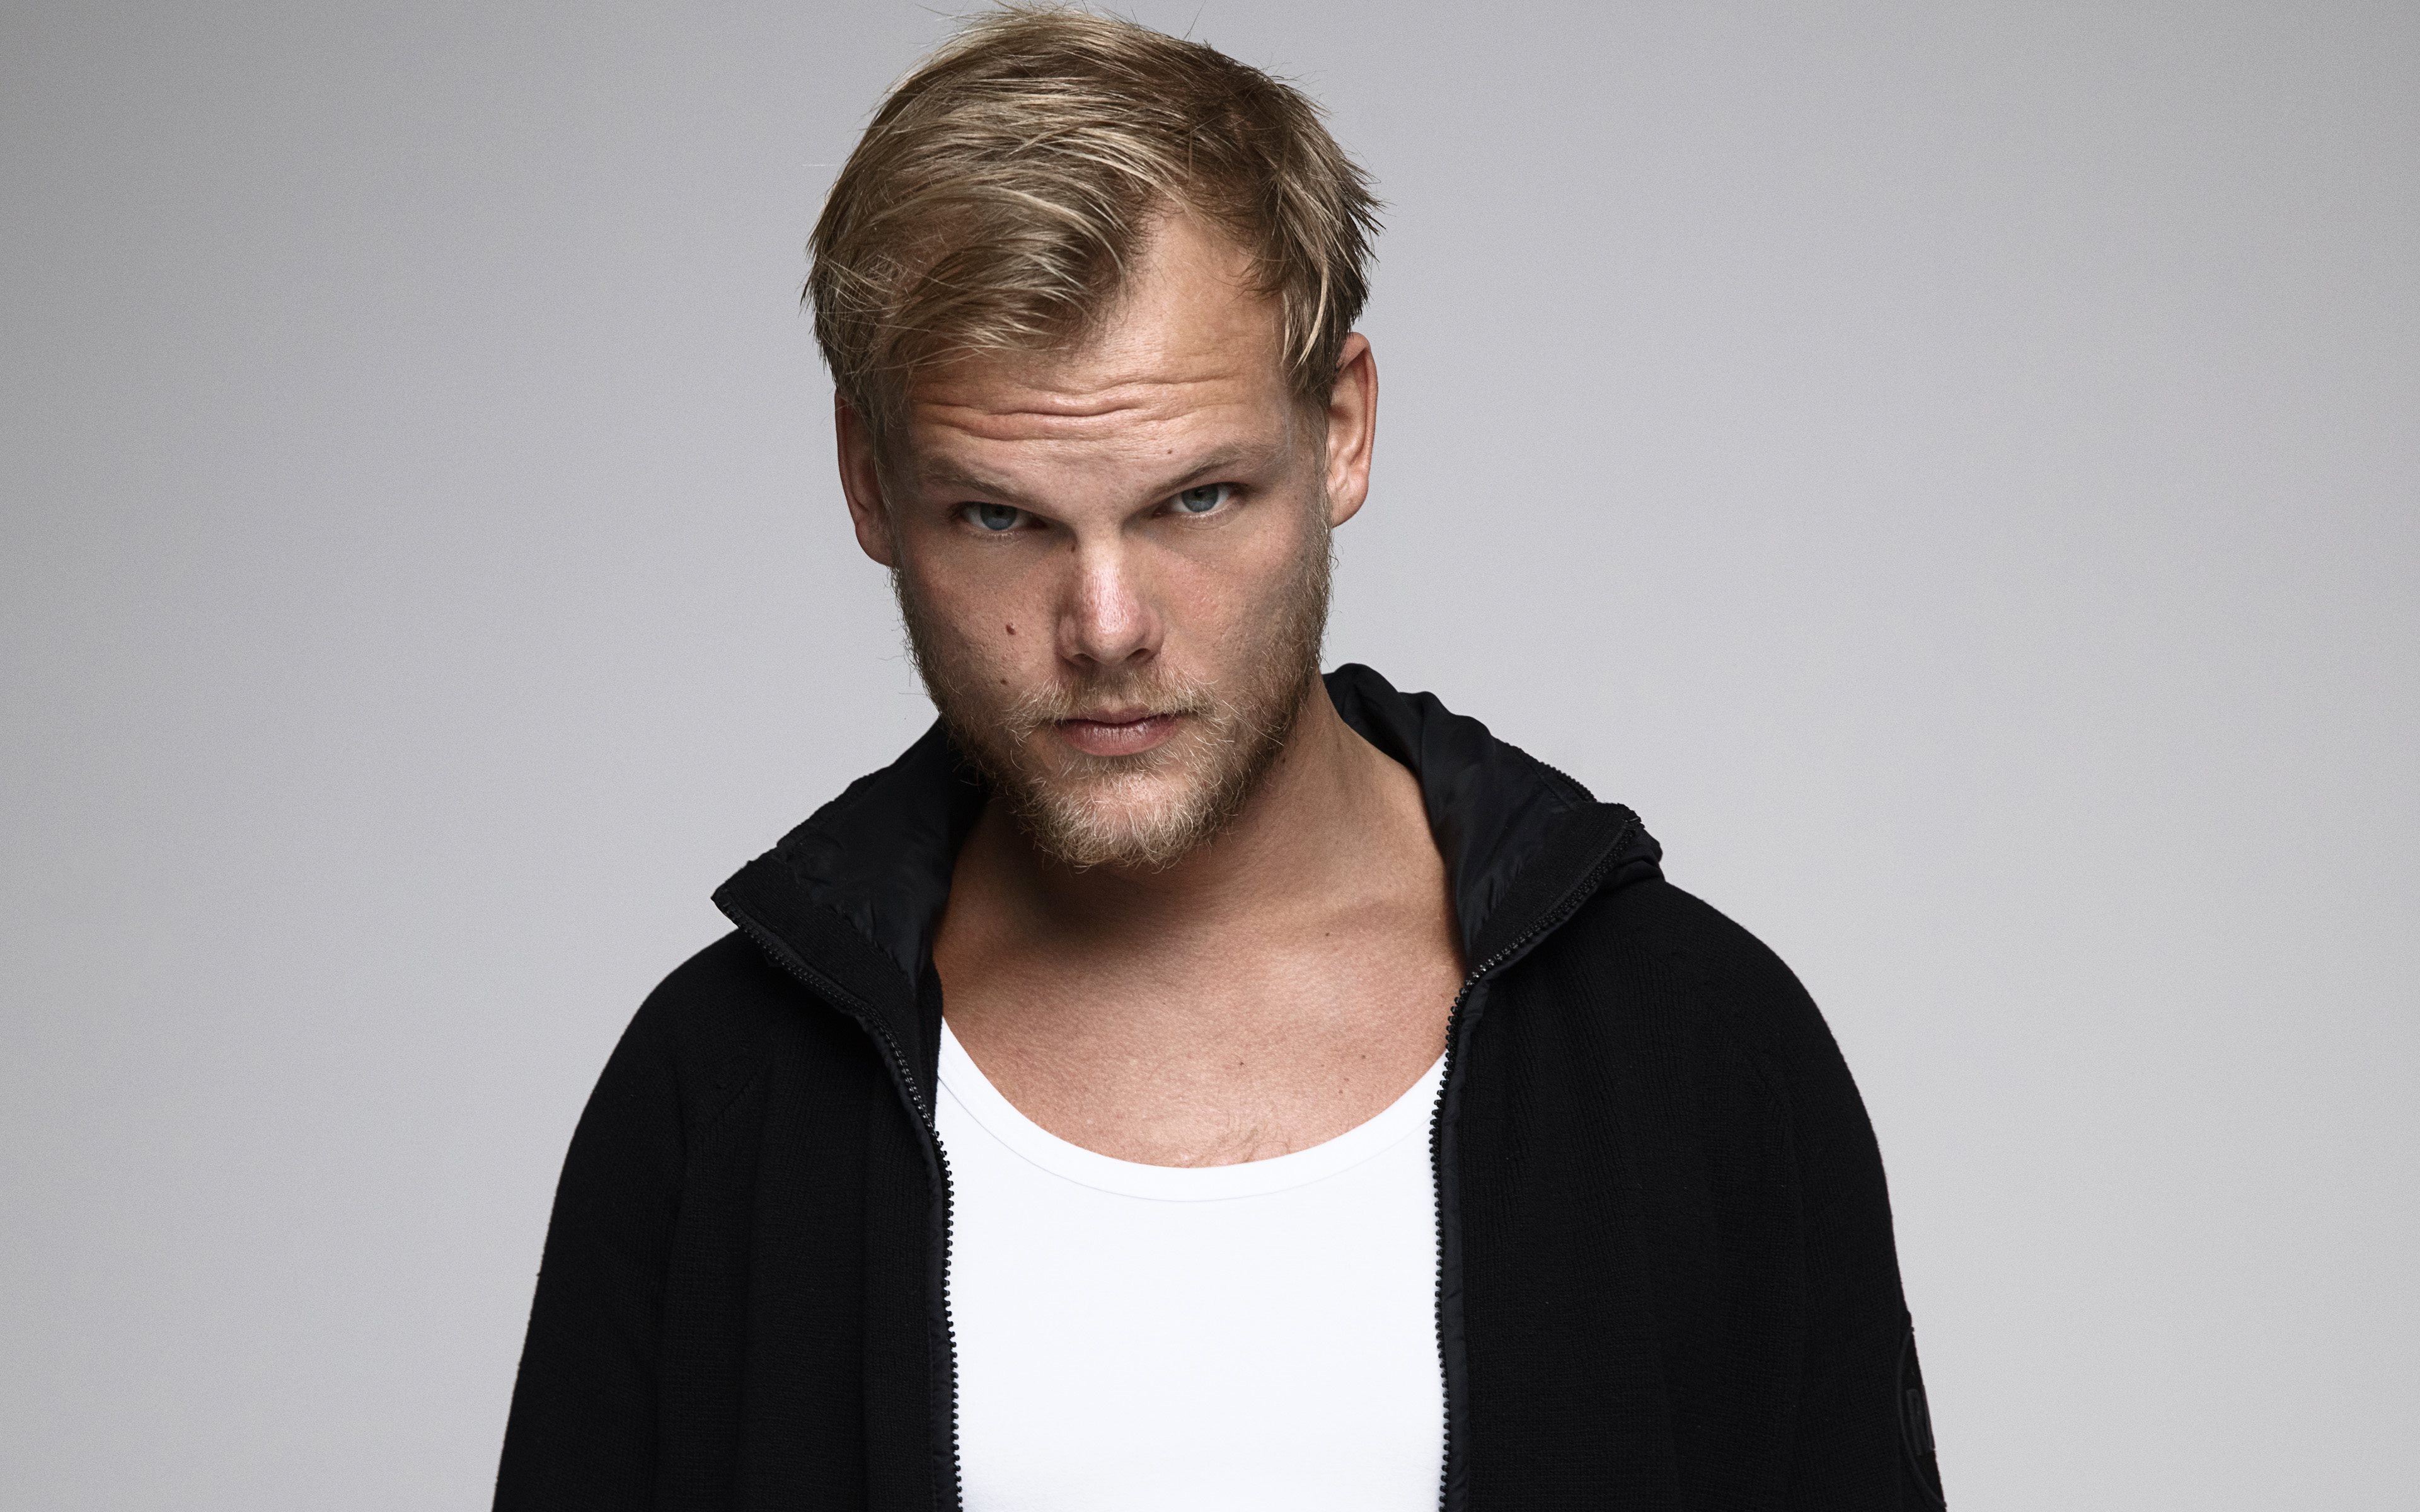 Download wallpaper Avicii, Young musicians, DJ, artists, Swedish DJ, Tim Bergling for desktop with resolution 3840x2400. High Quality HD picture wallpaper